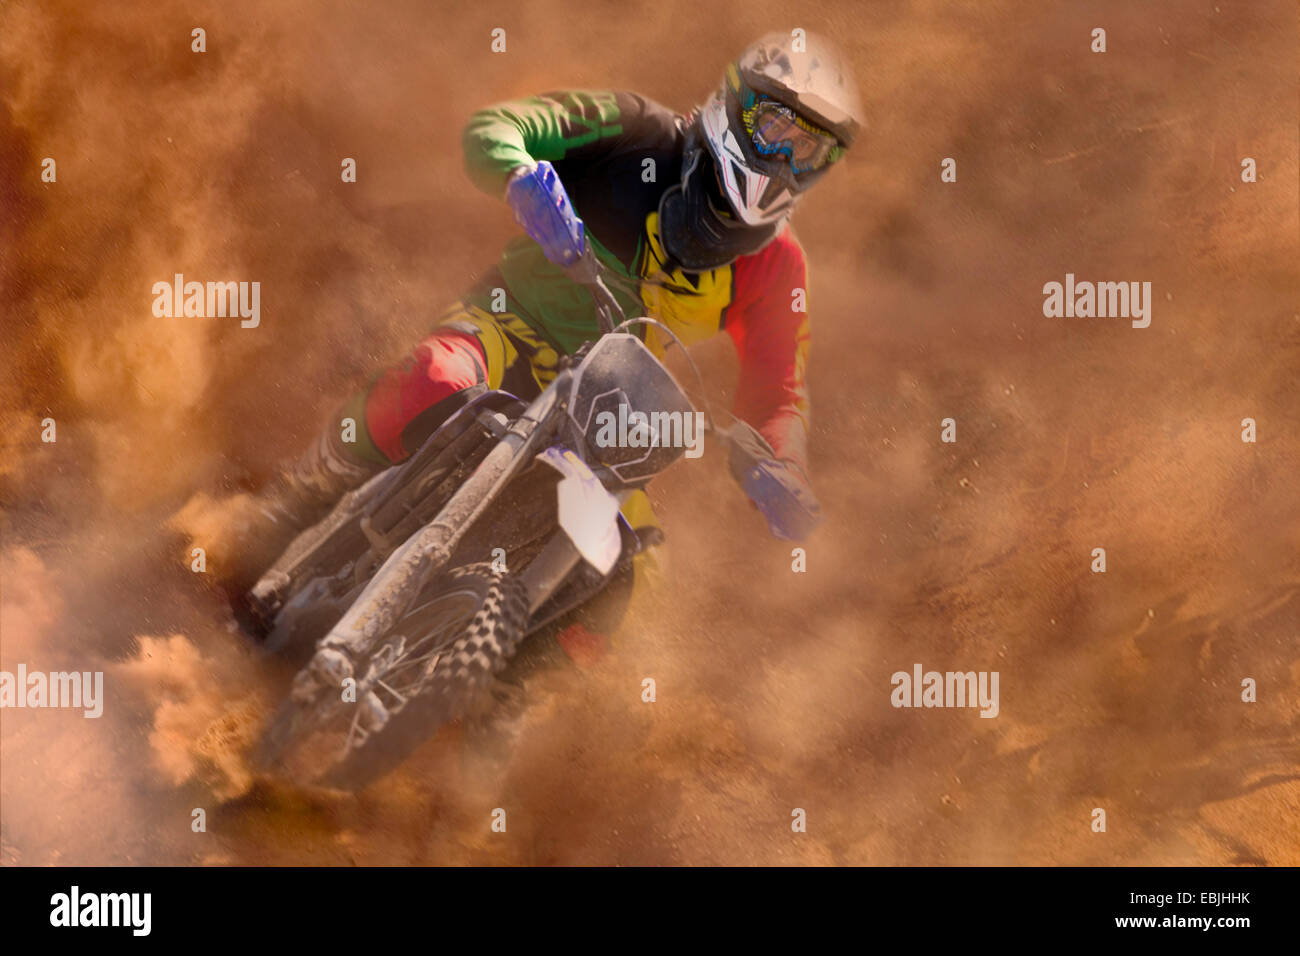 Young male motocross rider racing in dust Stock Photo